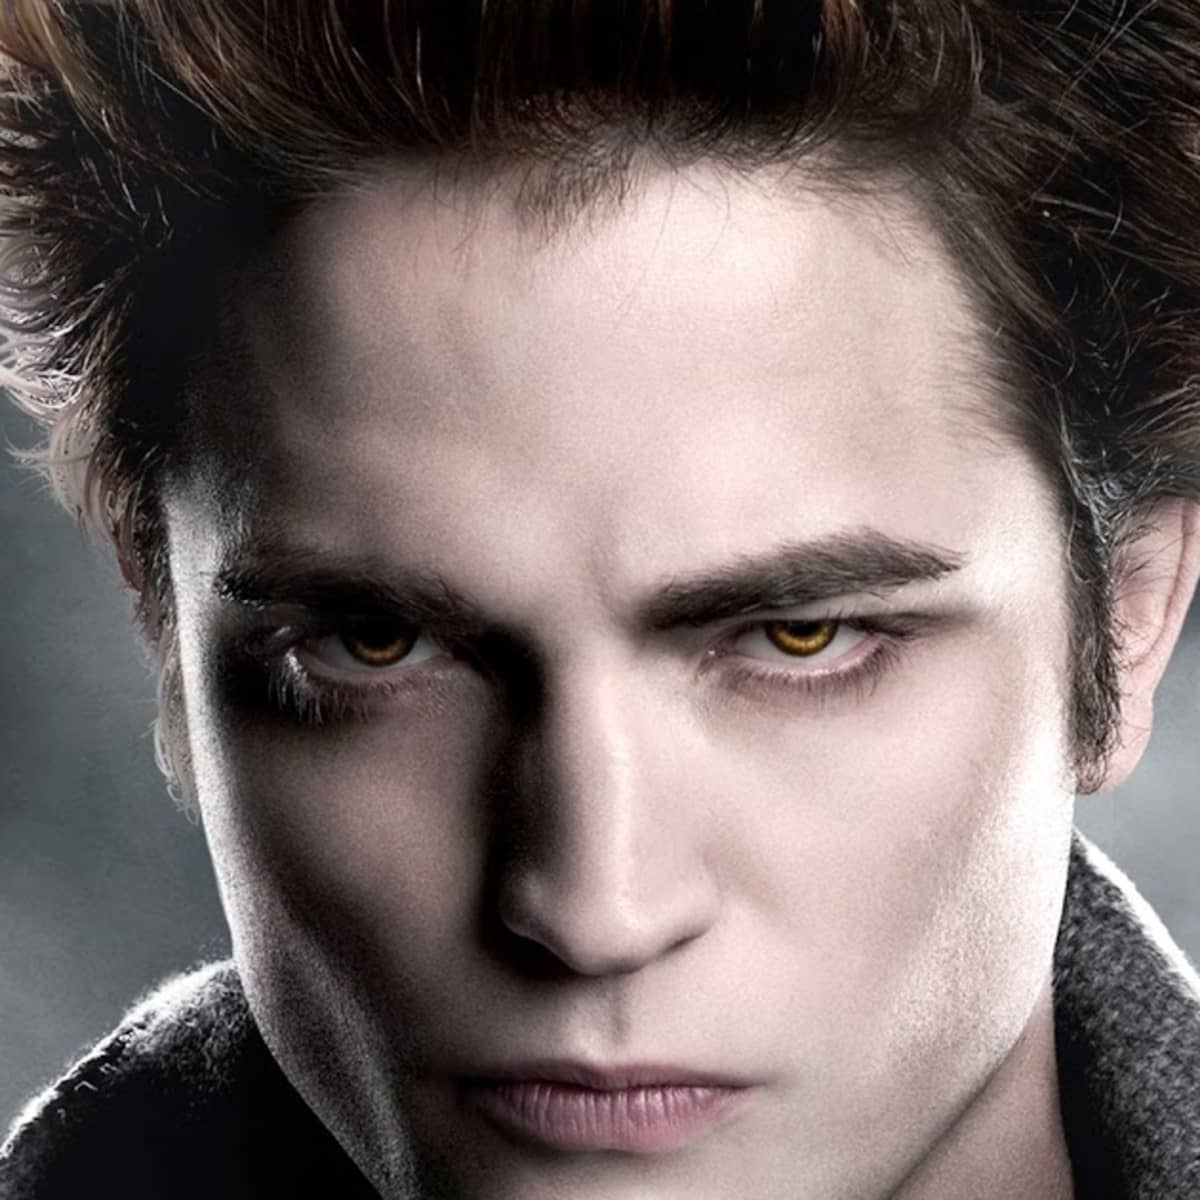 TWITARDED: Where In the World is Edward Cullen's Hair???